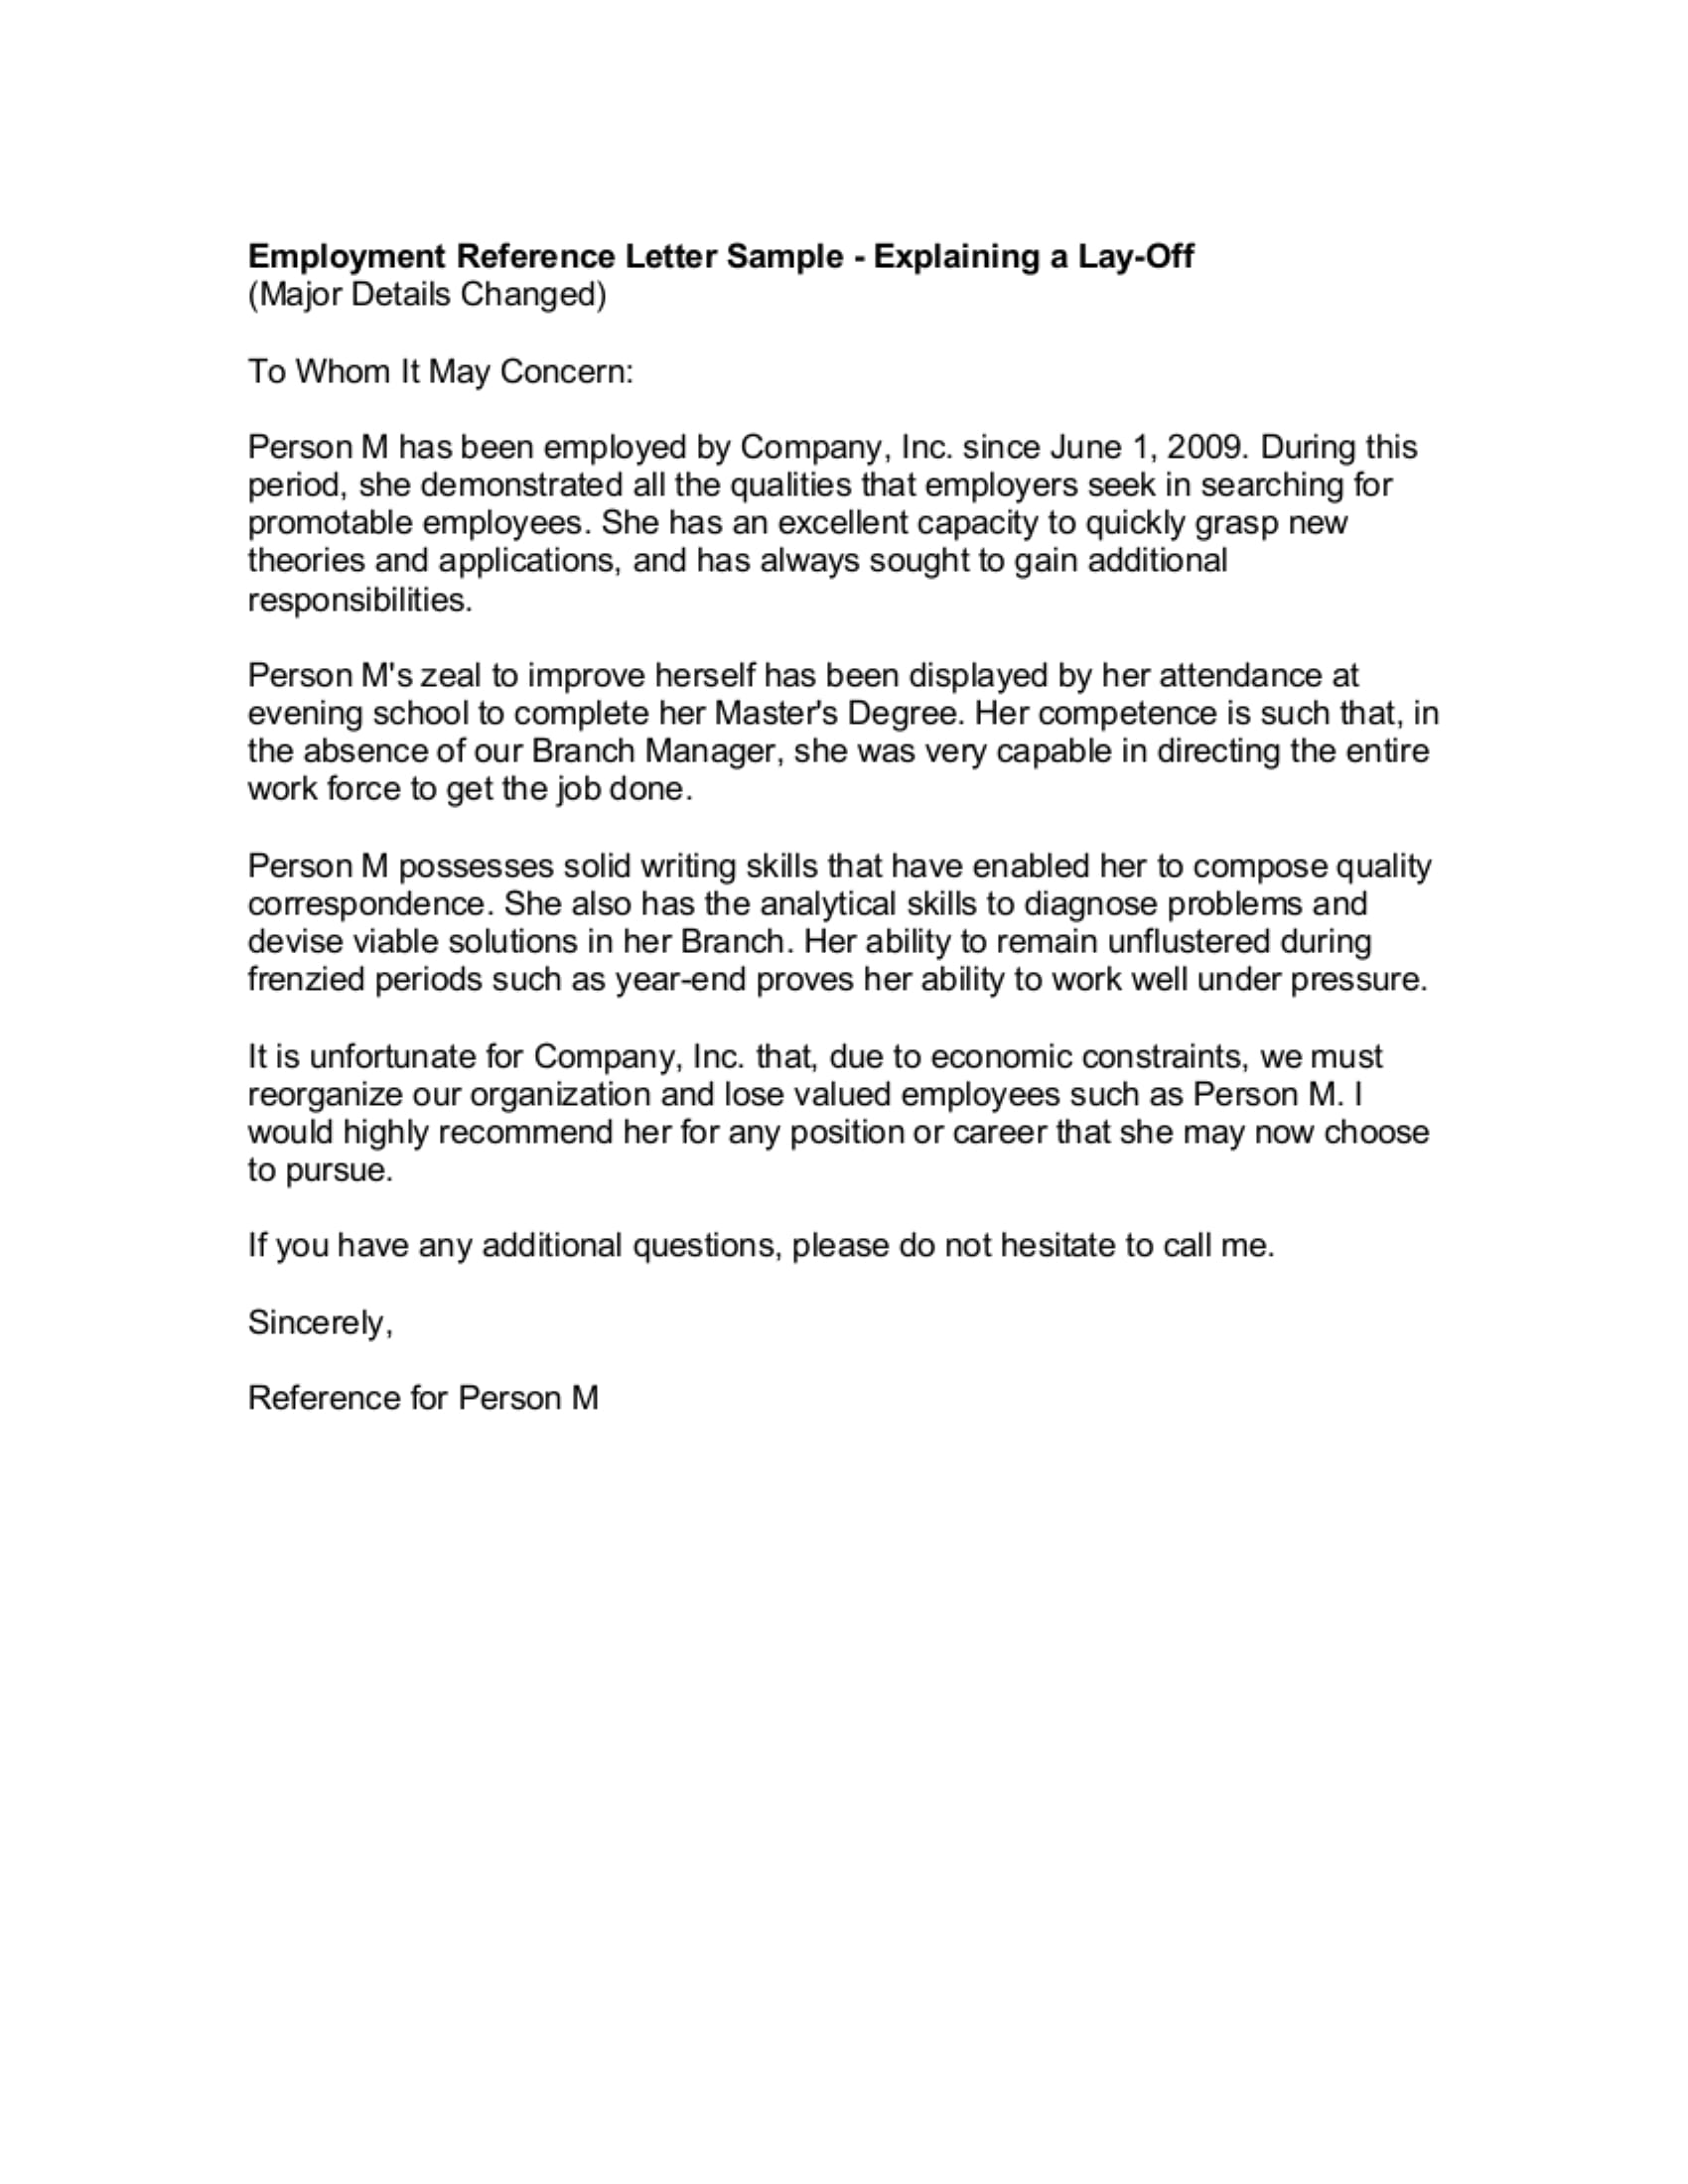 employment reference letter from a previous employer example 1